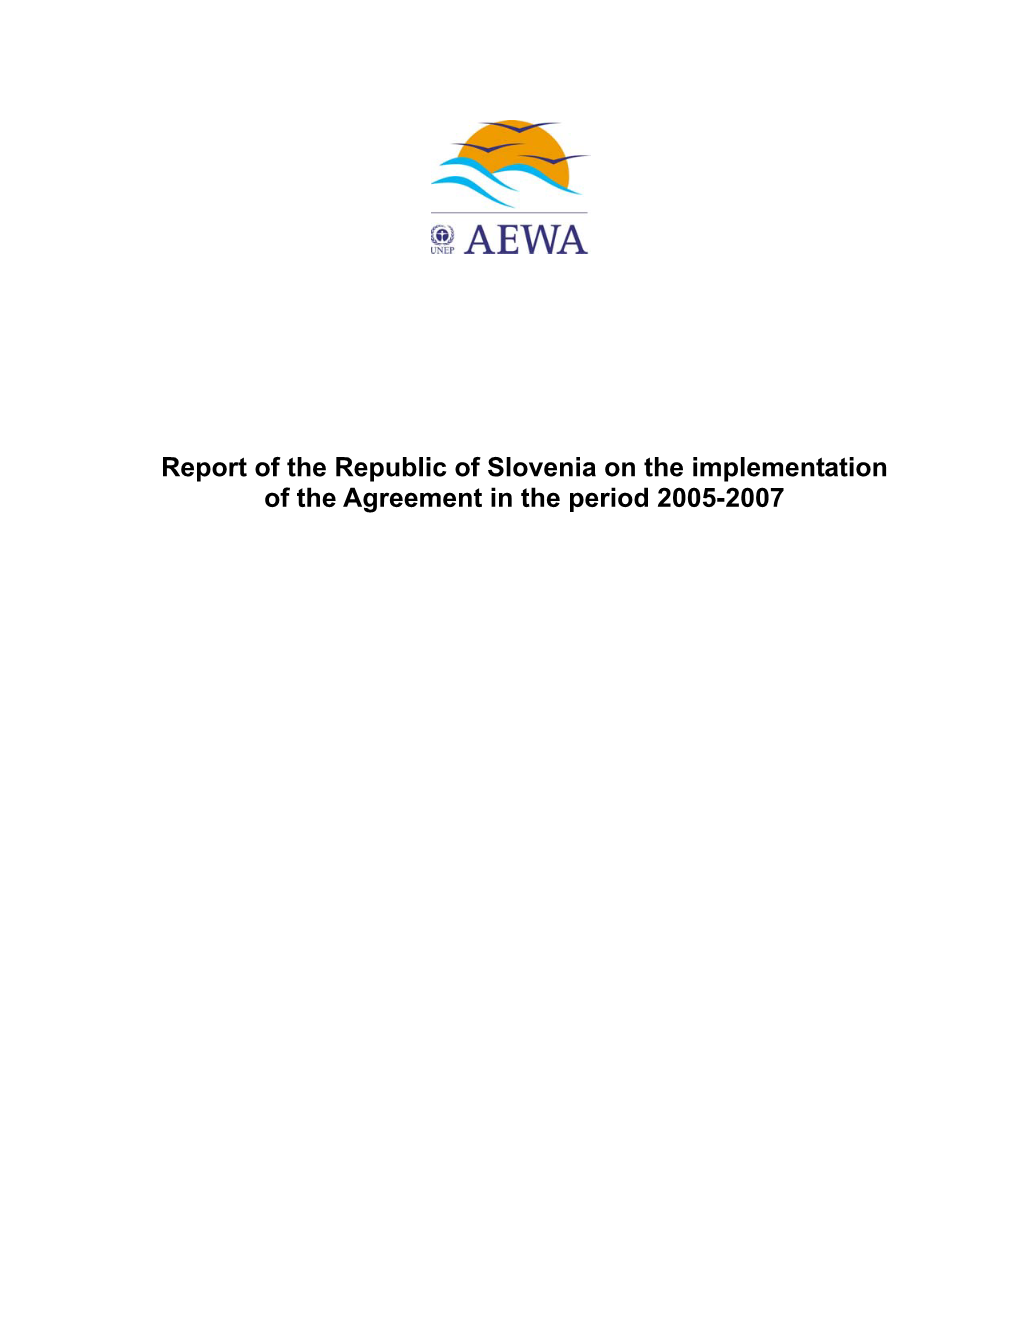 Report of the Republic of Slovenia on the Implementation of The